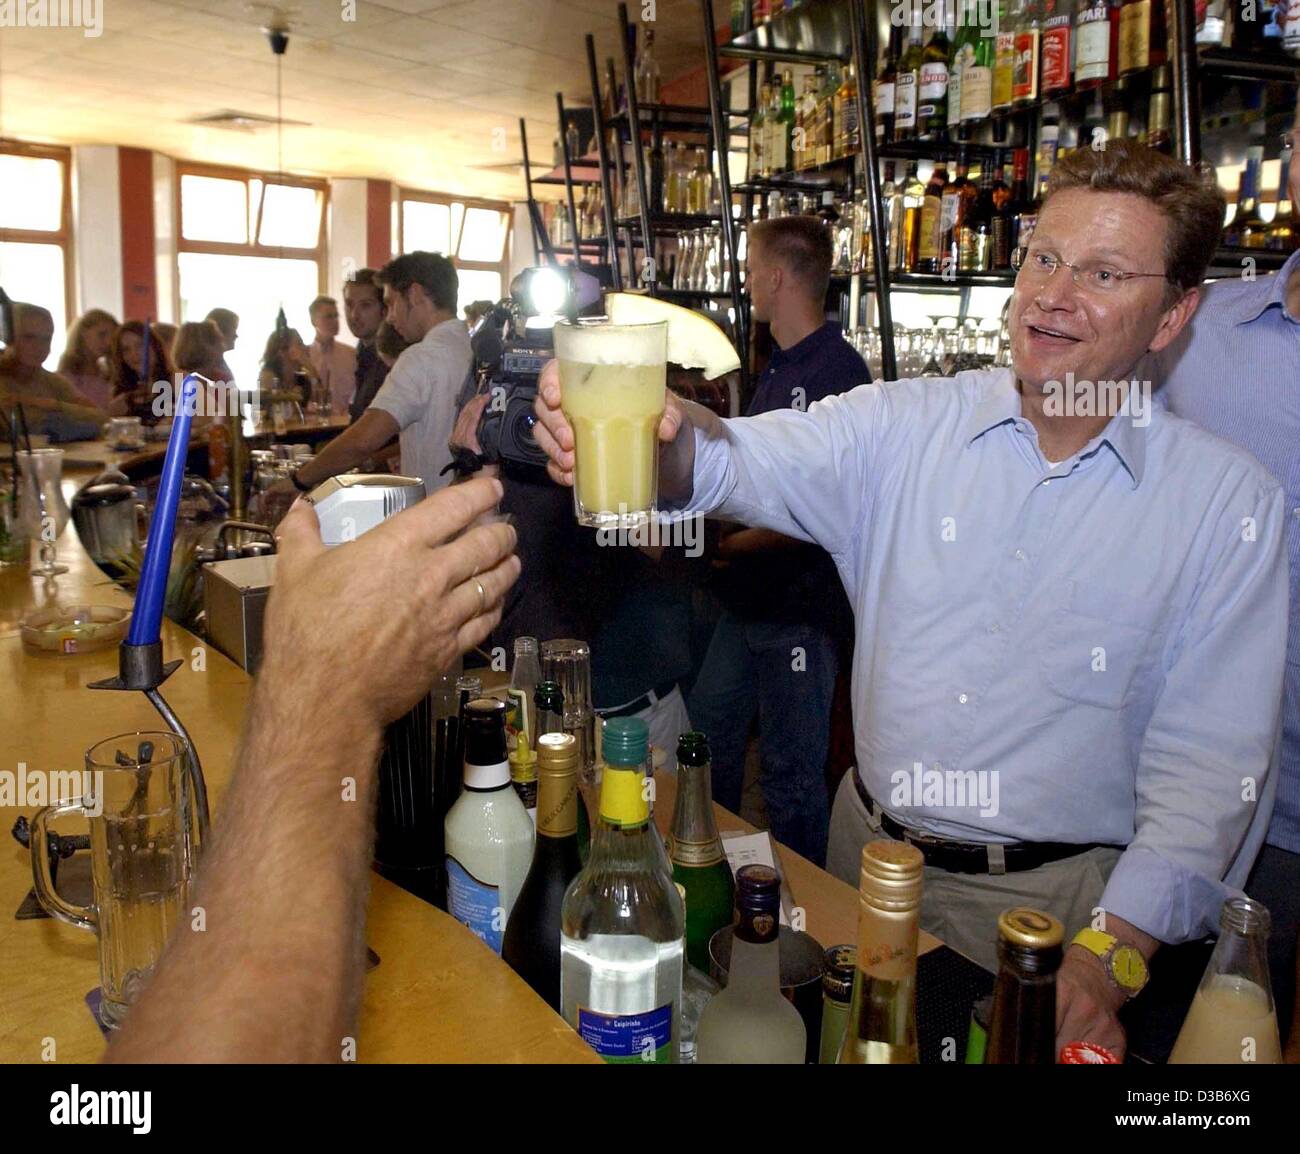 (dpa) - Guido Westerwelle, Chairman of the German liberal party FDP, serves as a barmixer to promote his election campaign programme in a student's cafeteria in Greifswald, Germany, 7 August 2002. For five weeks Westerwelle will tour the country in his trailer, the so called 'Guidomobil'. Stock Photo